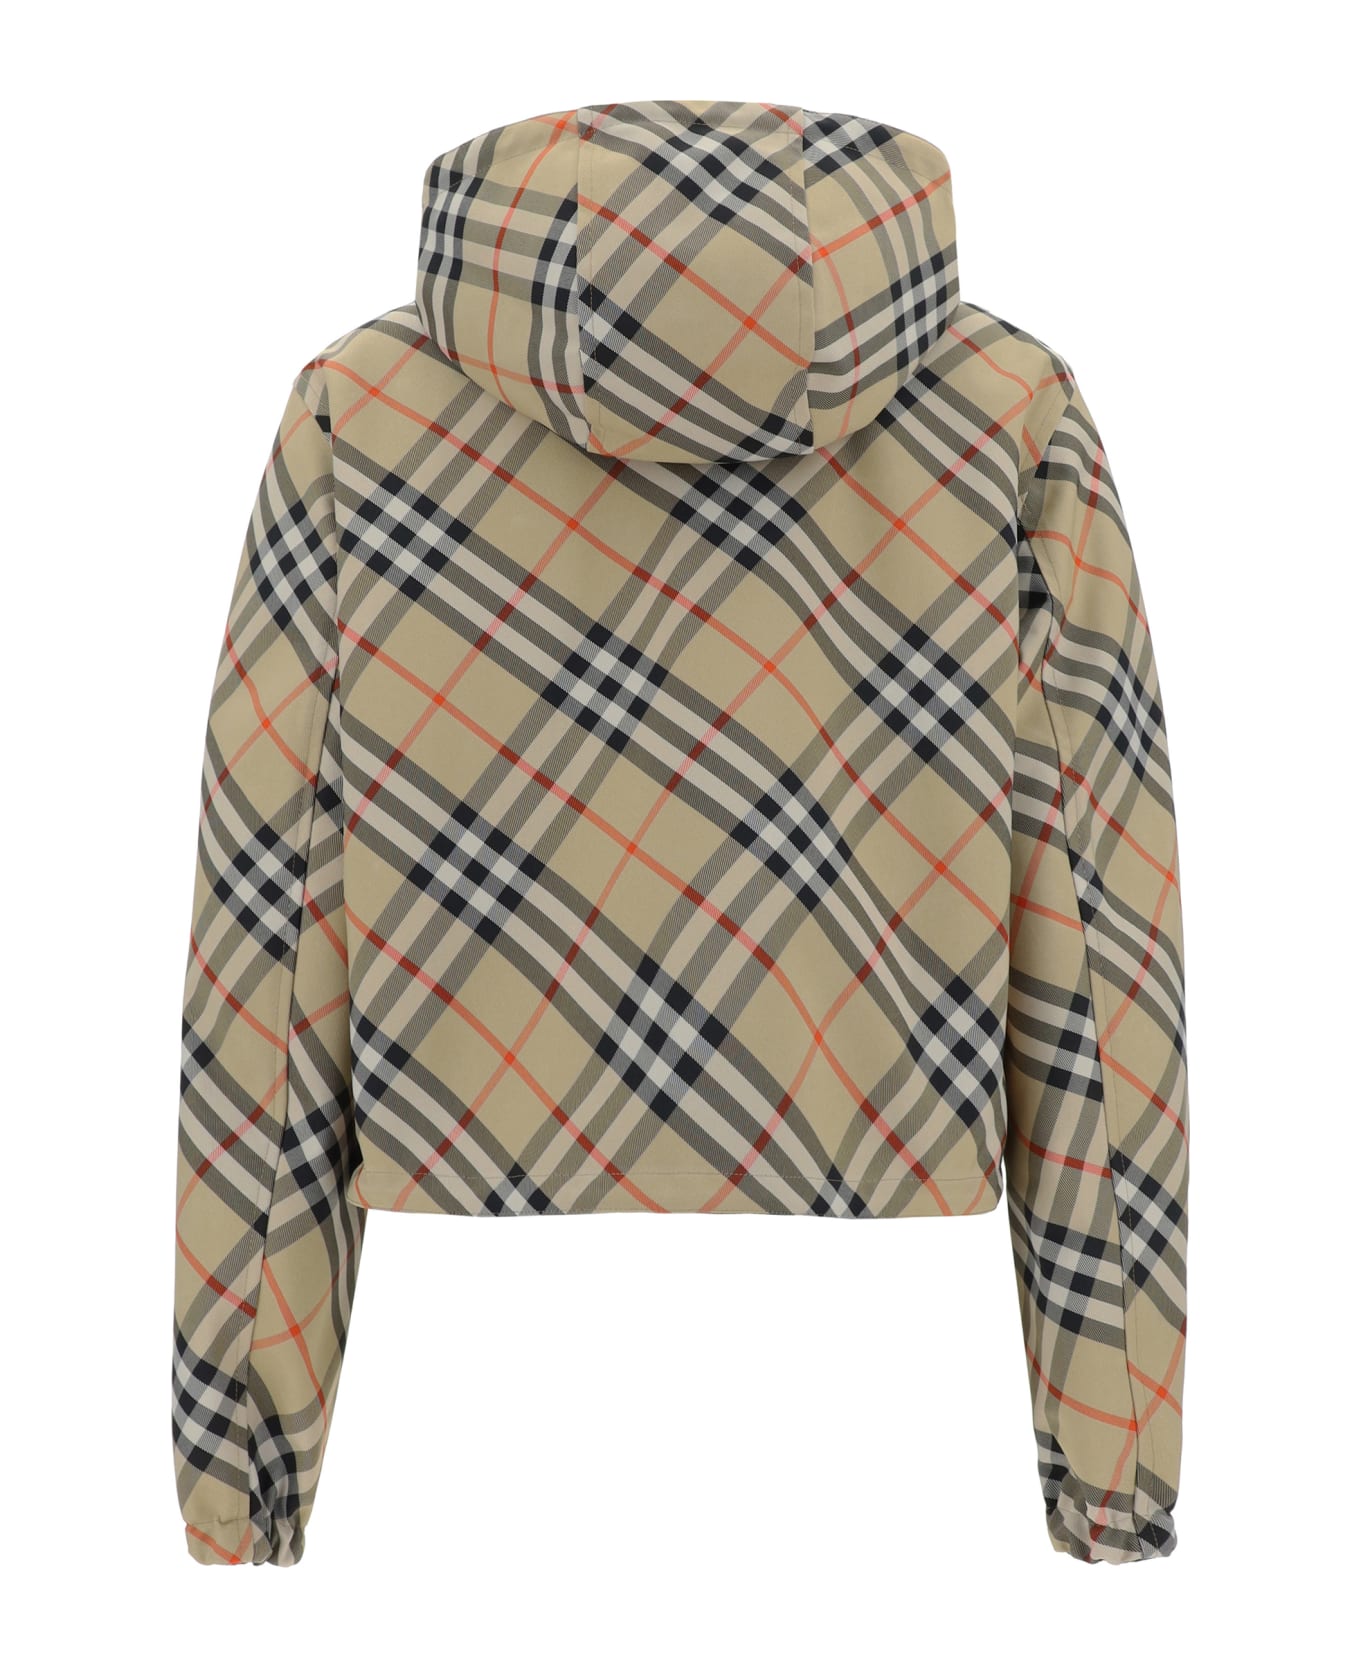 Burberry Reversible Hooded Jacket - Sand Ip Check ジャケット